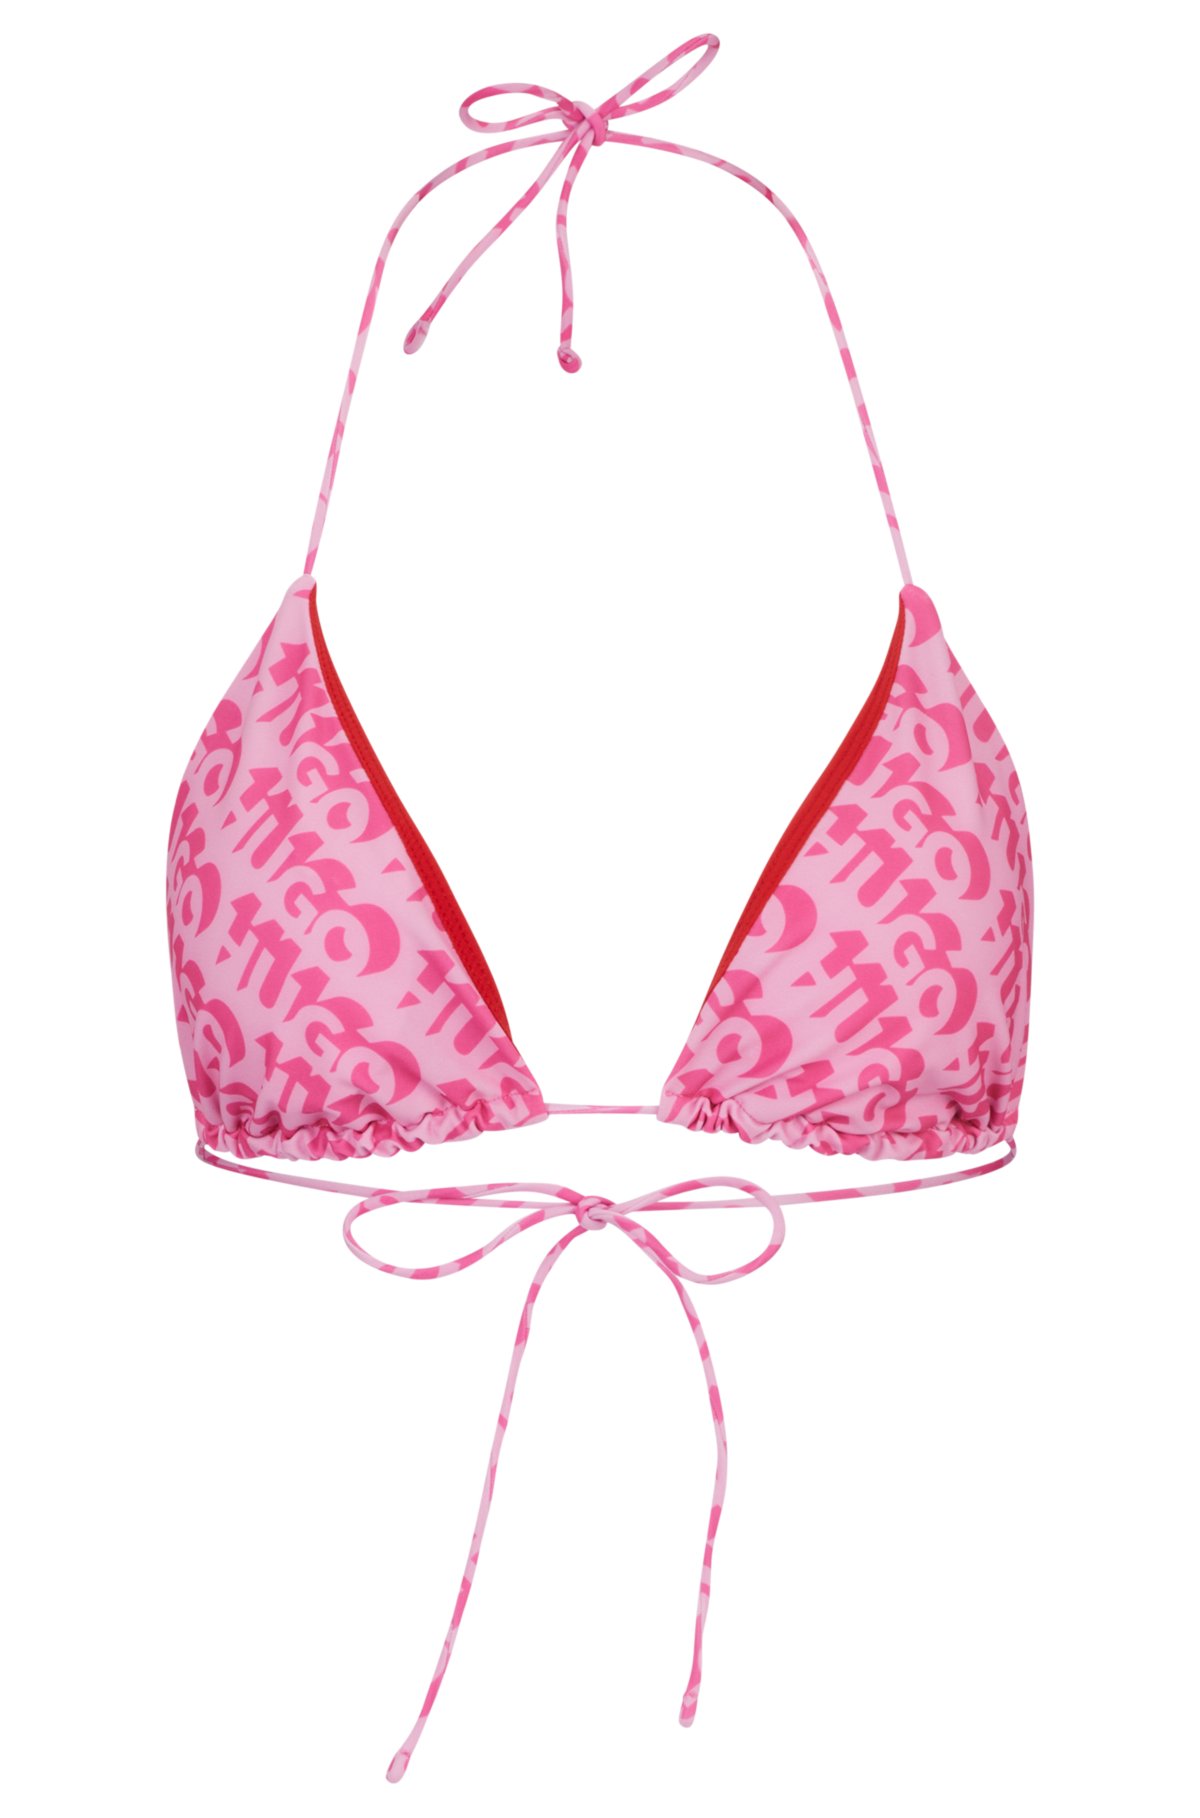 Triangle bikini top with repeat logo print, Pink Patterned